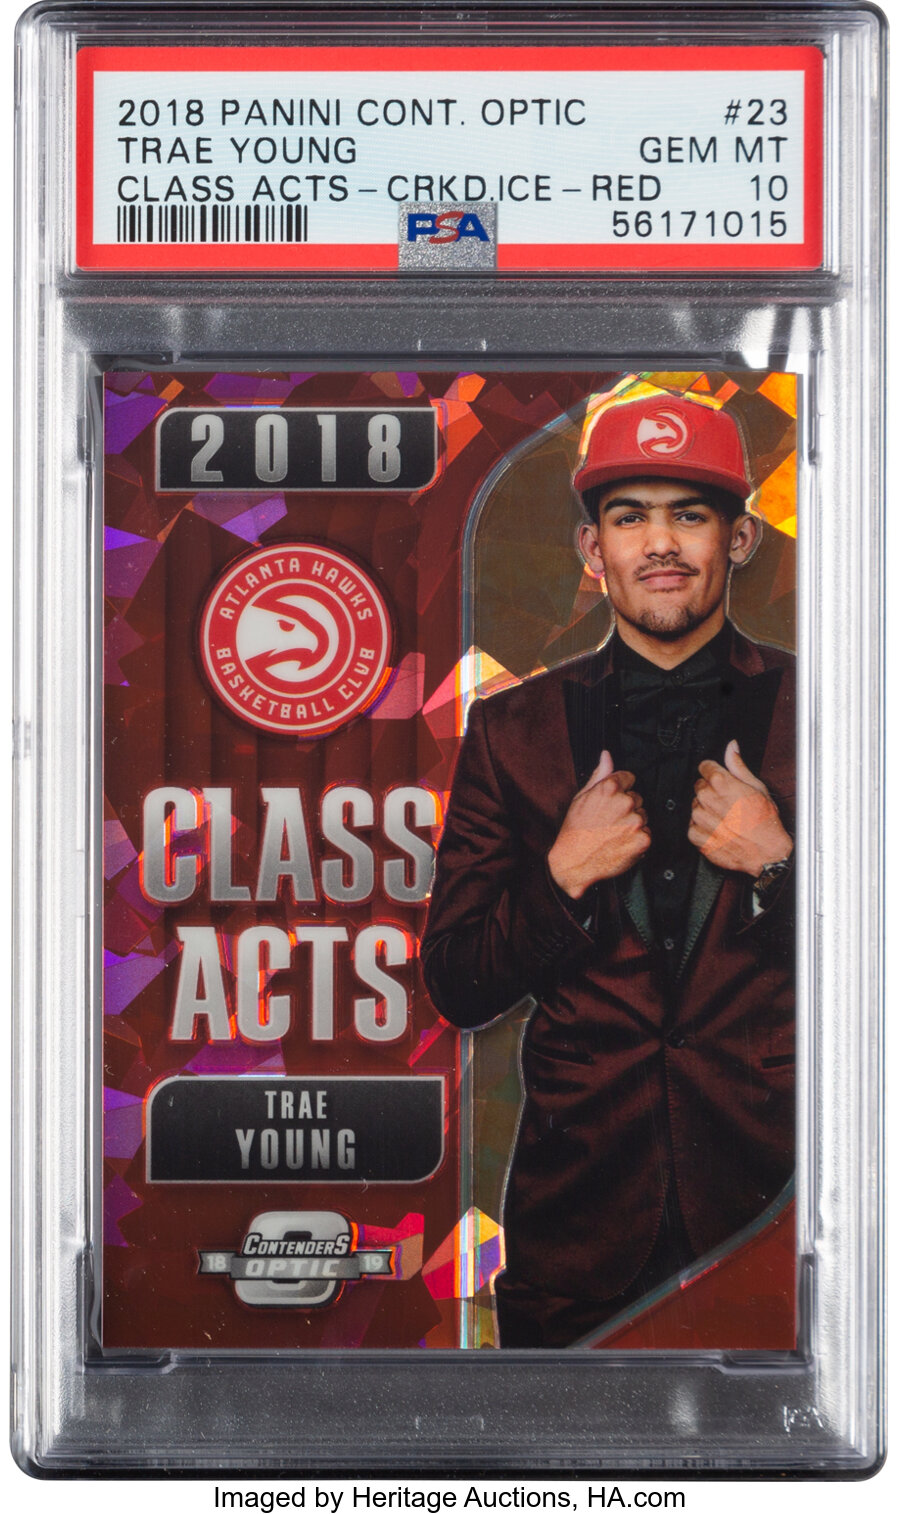 2018 Panini Contenders Optic Trae Young (Class Acts - Cracked Ice Red) #23 PSA Gem Mint 10